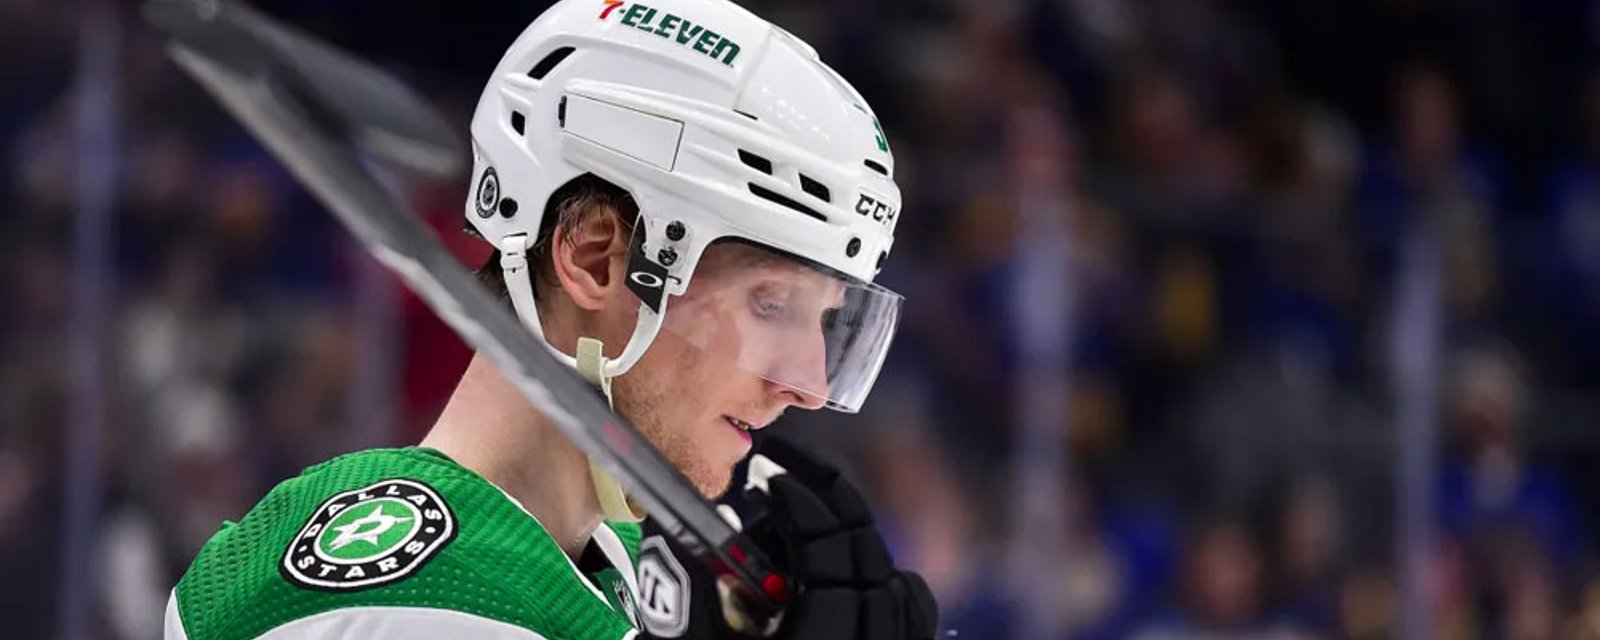 Klingberg fires his agent as he continues to go un-signed